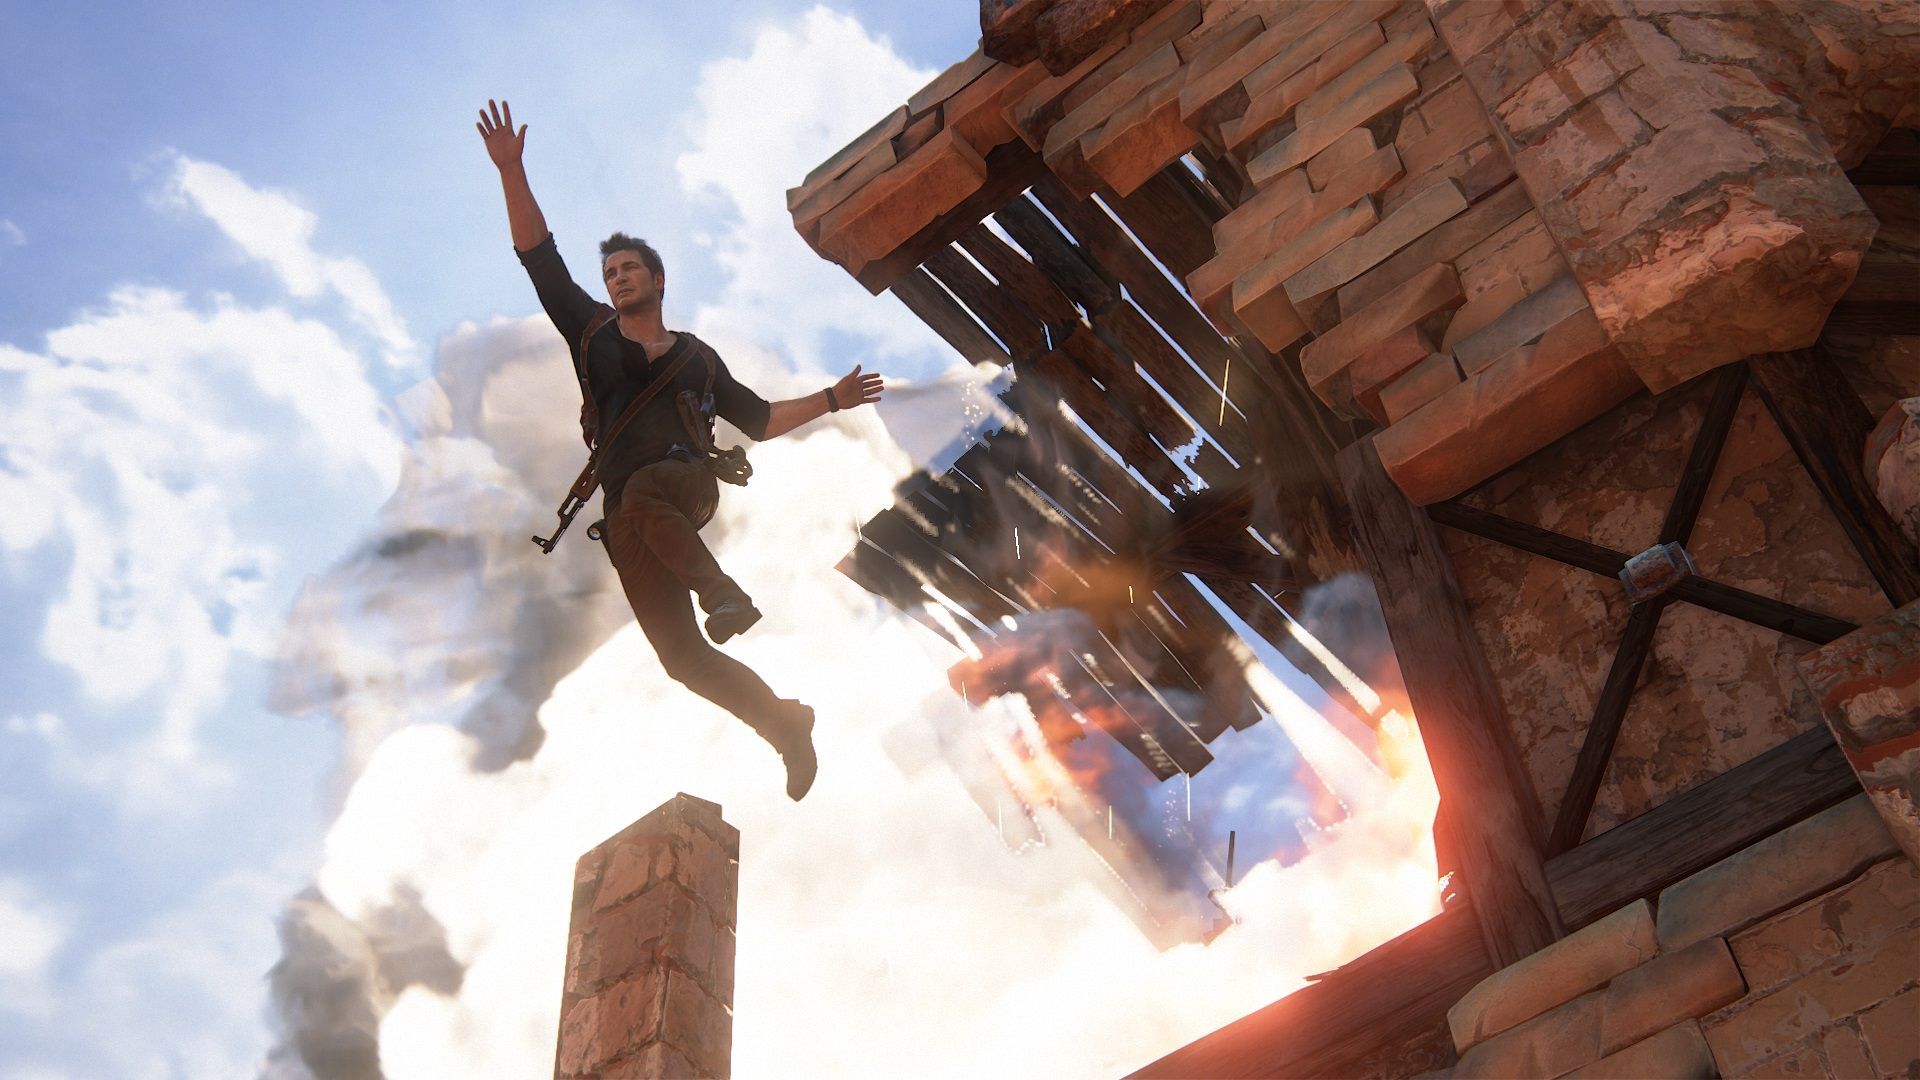 Uncharted Director Says That Nathan Drake Is Still in Retirement